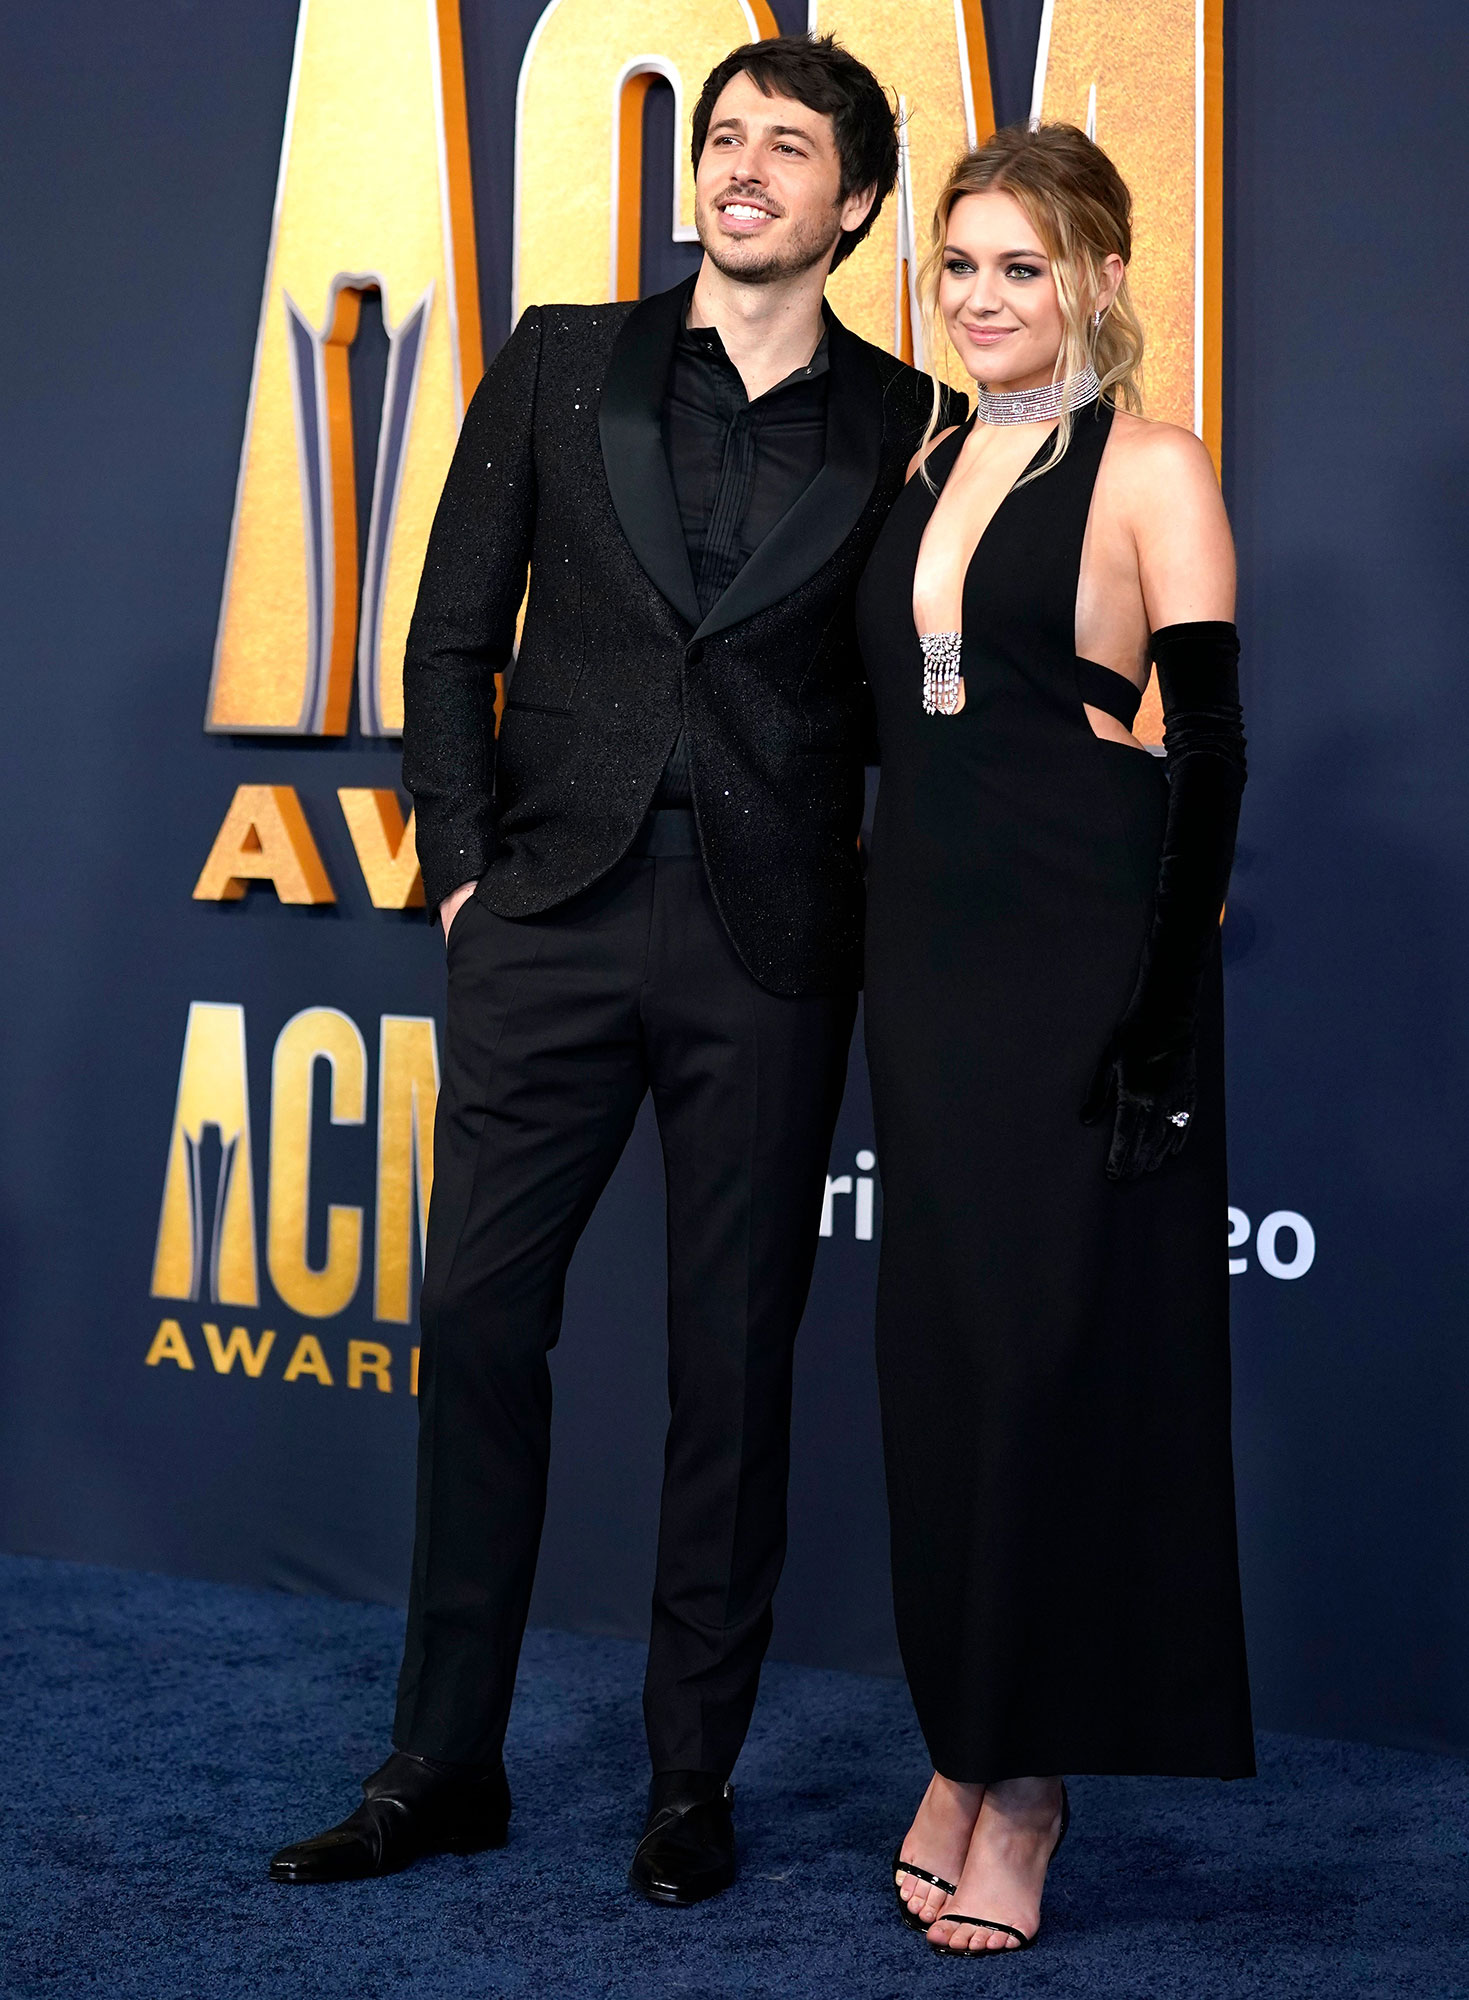 Morgan Evans and Kelsea Ballerini Hottest Couples on the 2022 ACM Awards Red Carpet